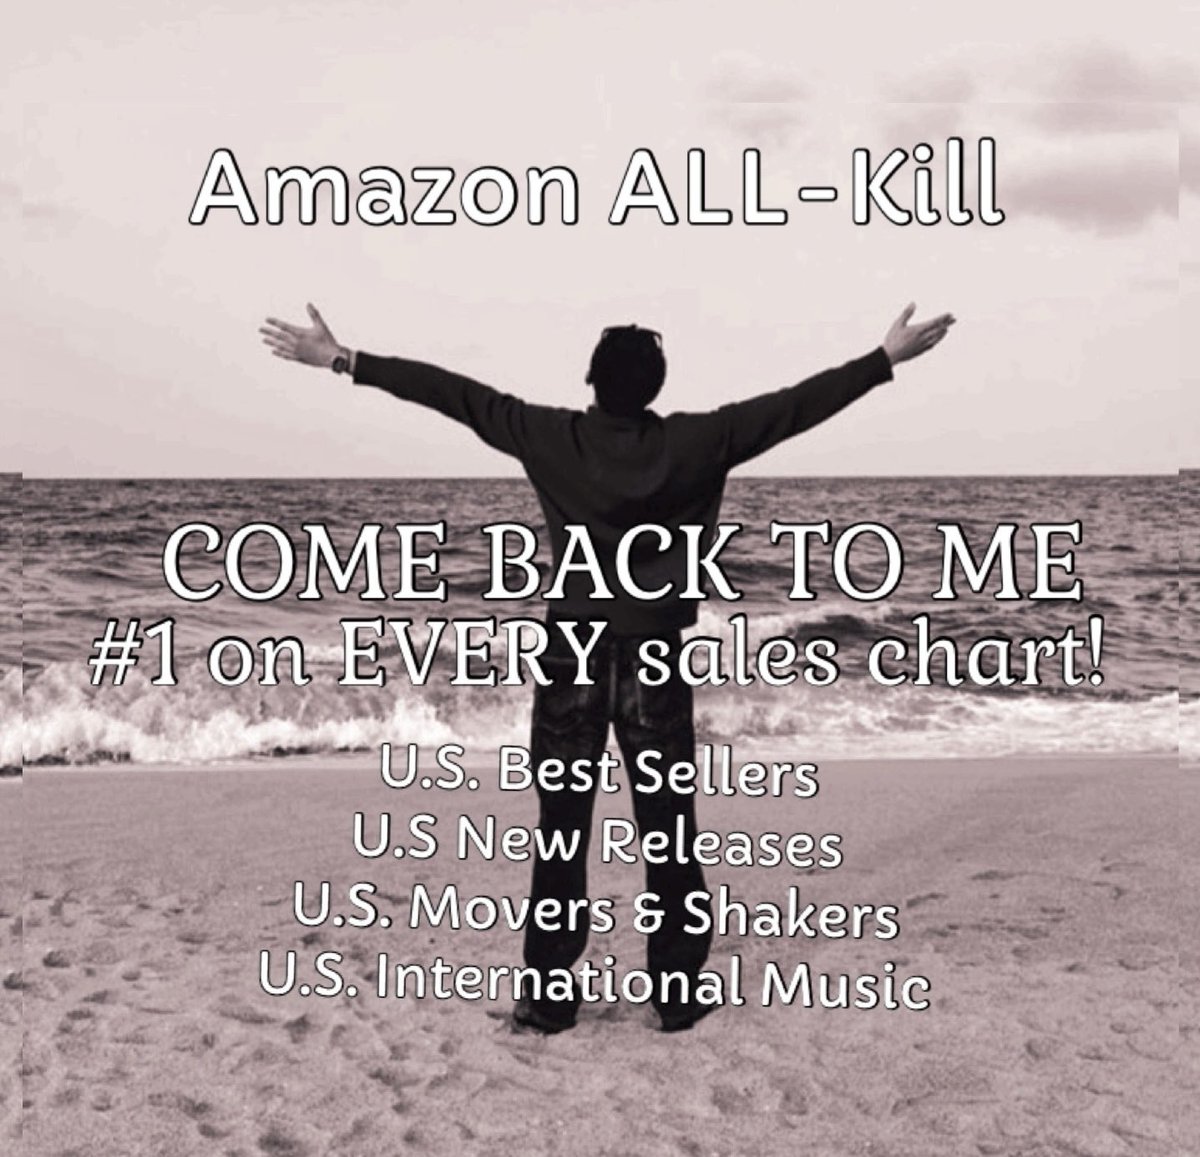 🇺🇸 Amazon Music Digital Songs Sales UPDATE

#ComebacktomebyRM is #1 on EVERY Amazon Sales Chart in an Amazon All-Kill!!

CONGRATULATIONS RM
Congratulations ARMY

Thank you 🇺🇸 ARMY for buying & 🌏 ARMY for supporting!

#ARMYonAmazonMusic

Buying links: army-onrpwp.carrd.co